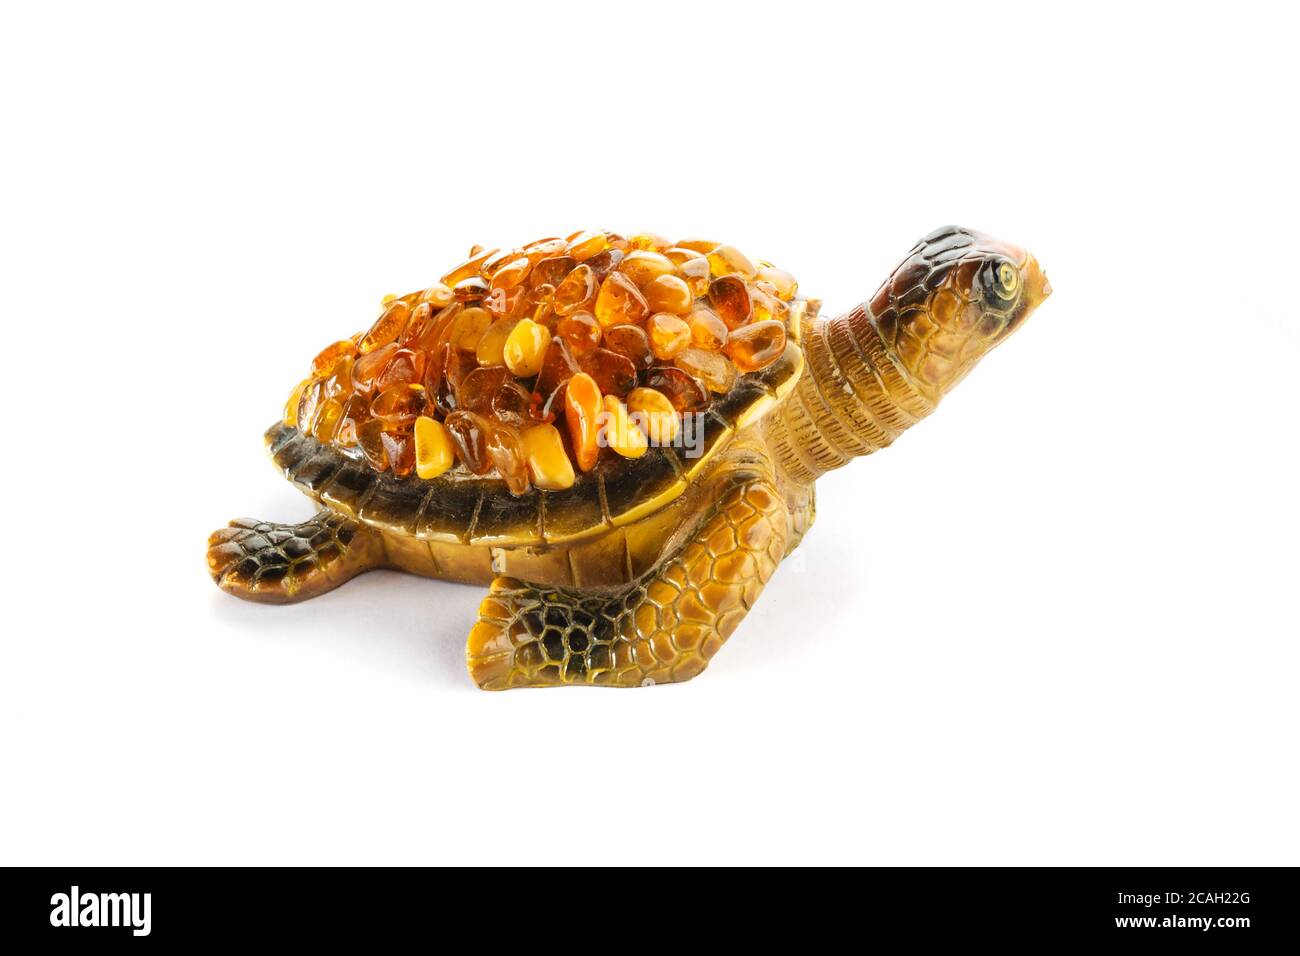 Figurine of a turtle on a white background with amber stones on the shell. Stock Photo